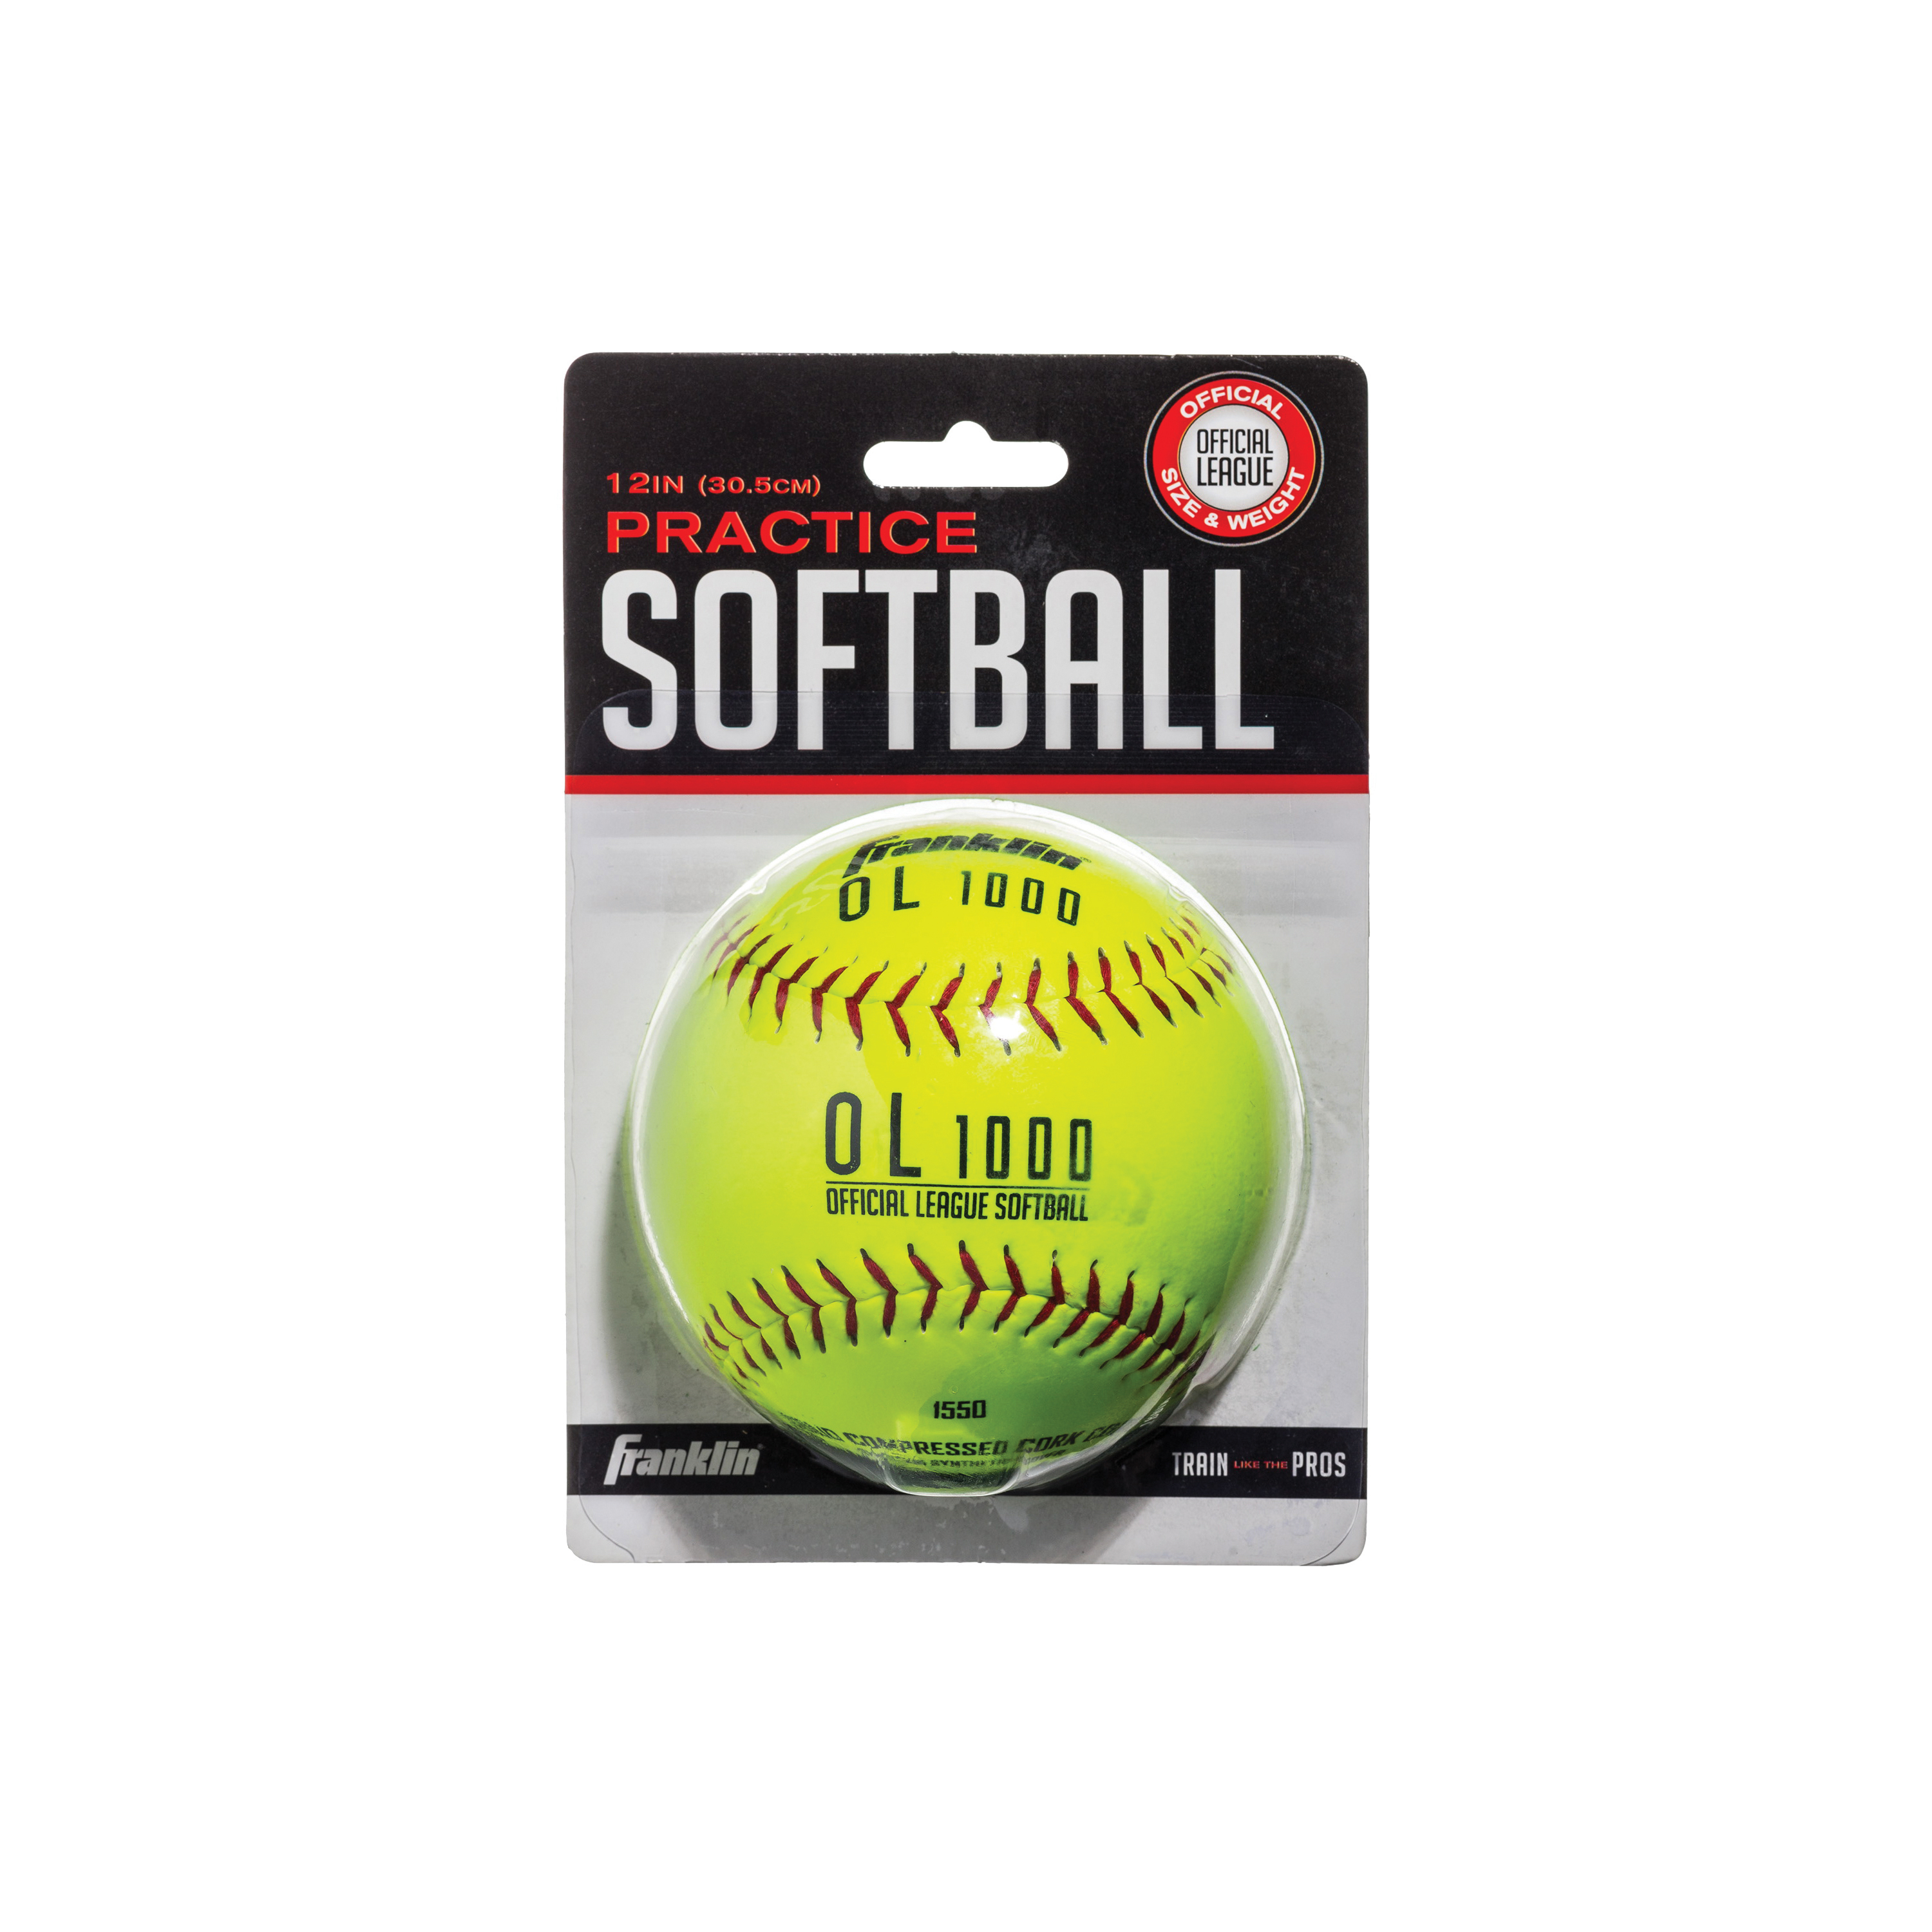 OL 1000 Series 10981 Soft Ball, 12 in Dia, Synthetic